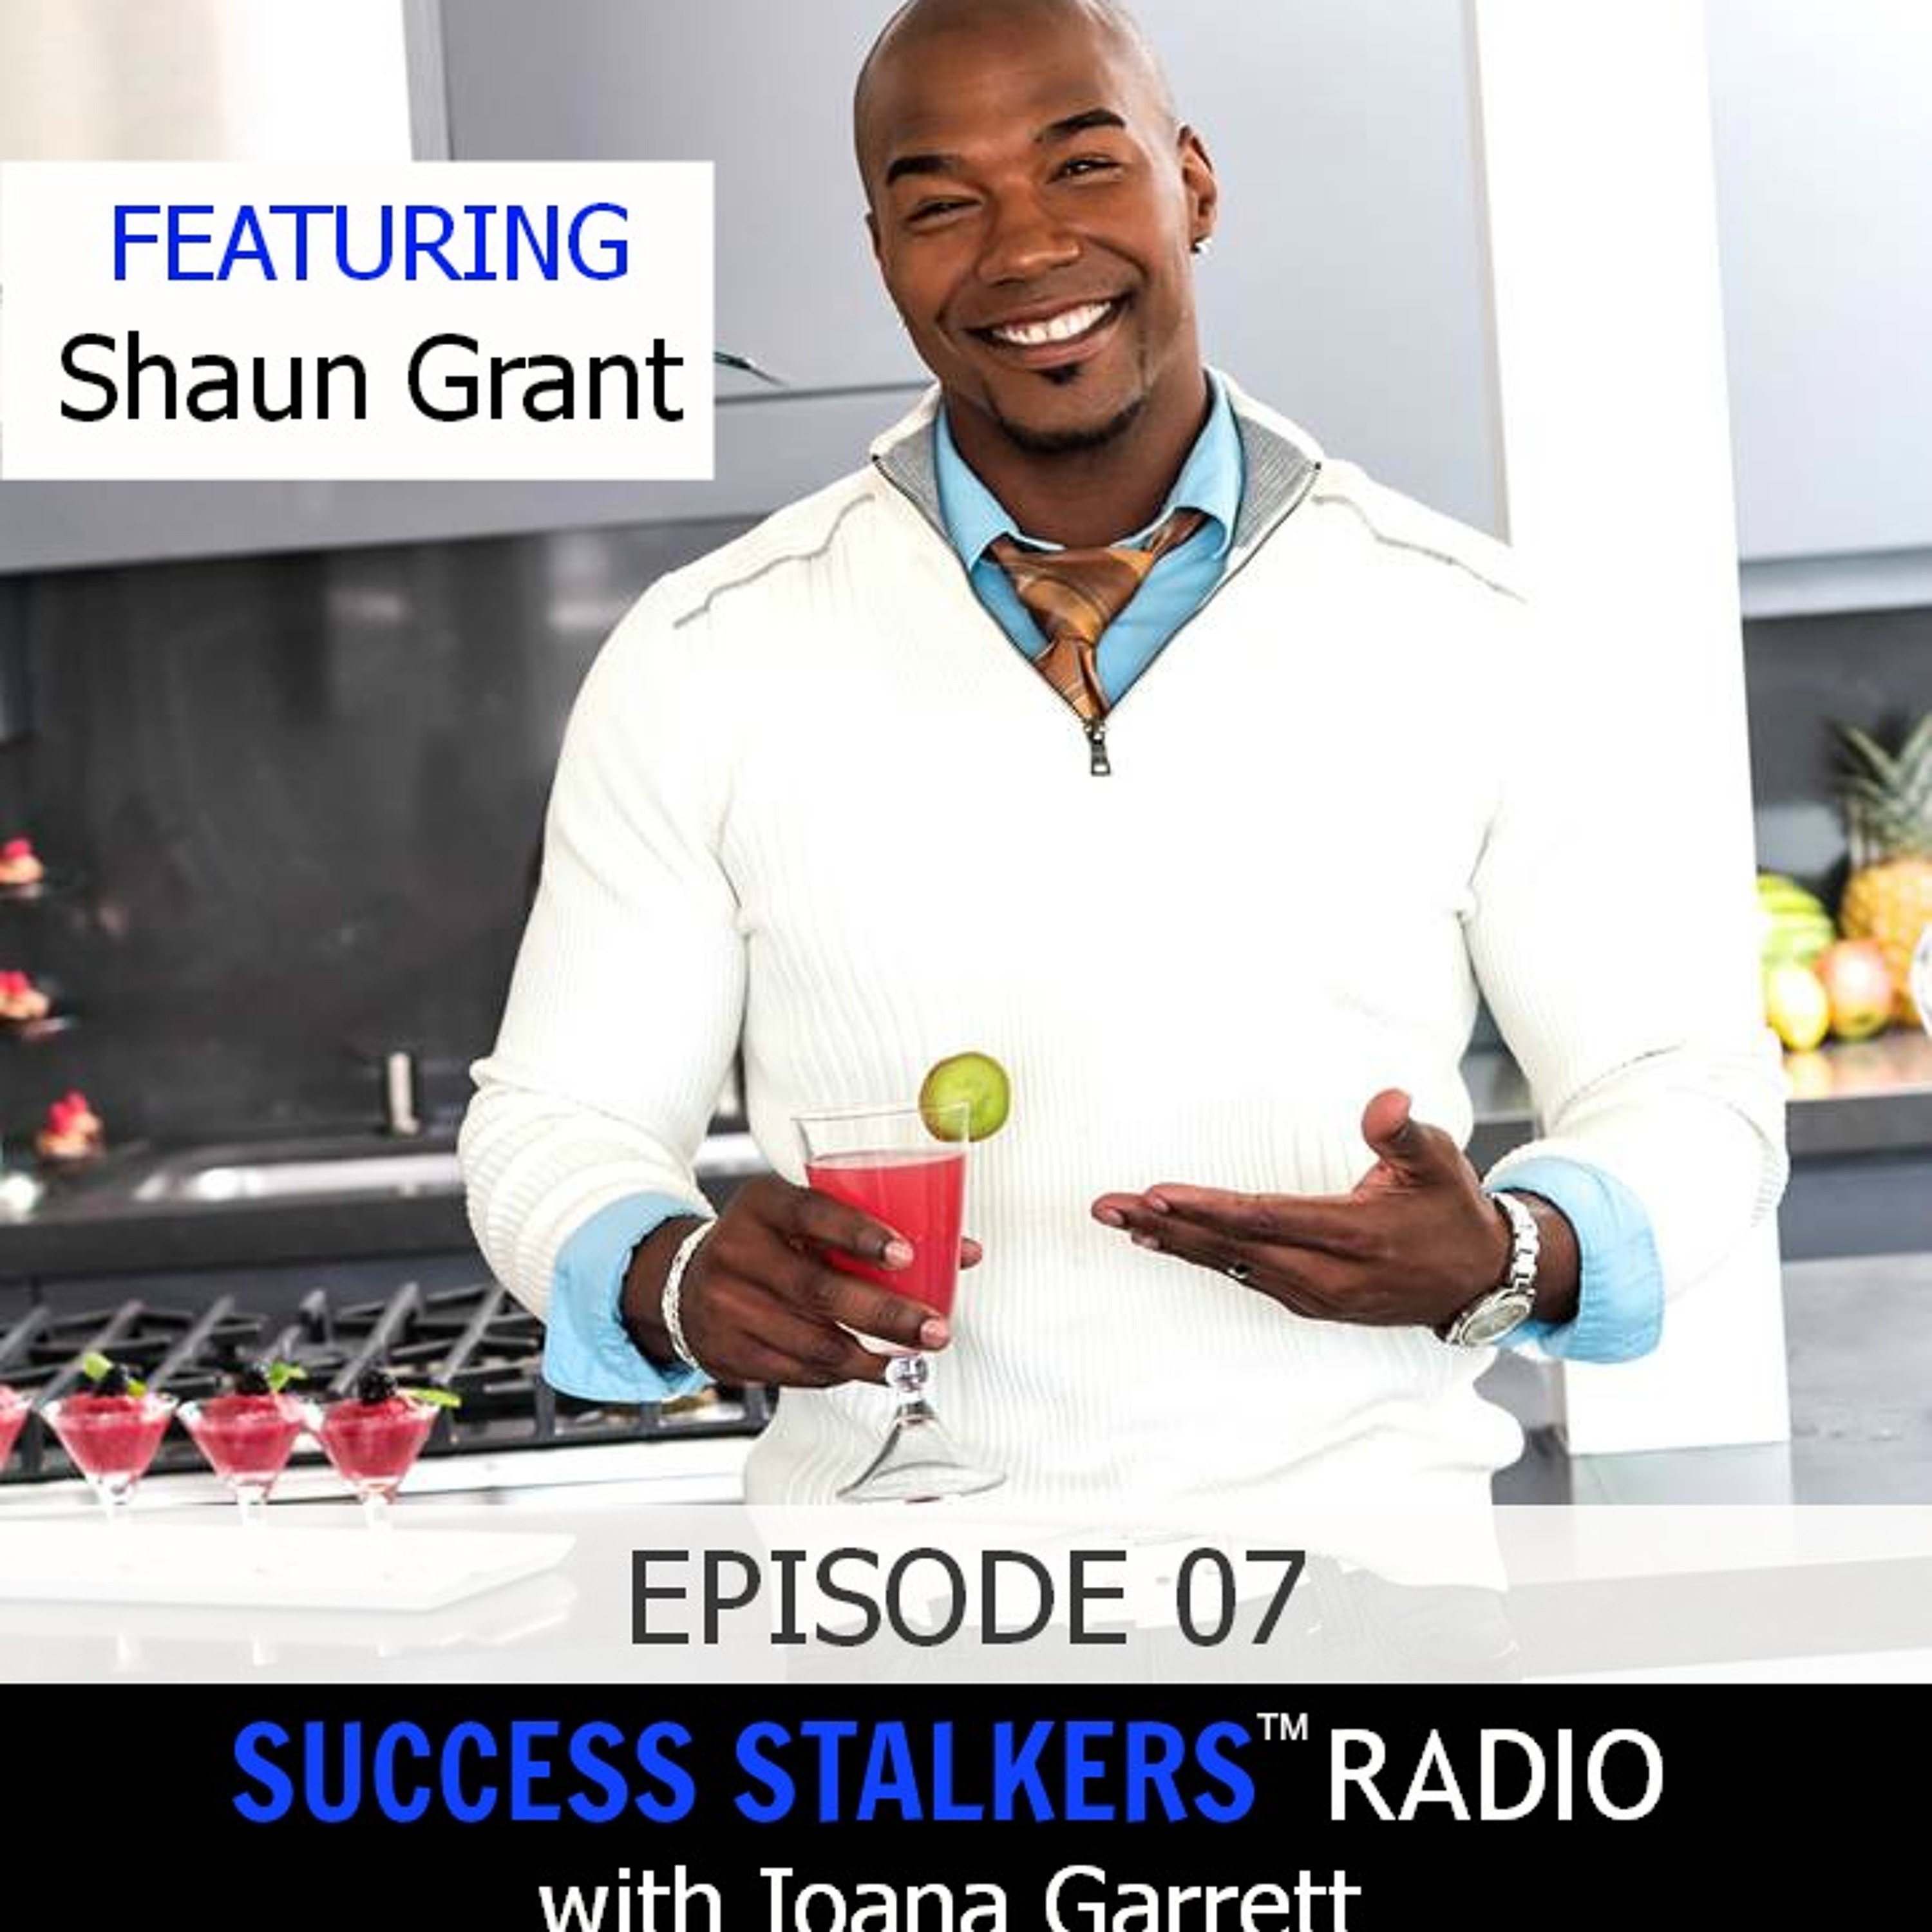 07: Shaun Grant: Life Coach and Fitness Expert Shares His Passion For Helping People